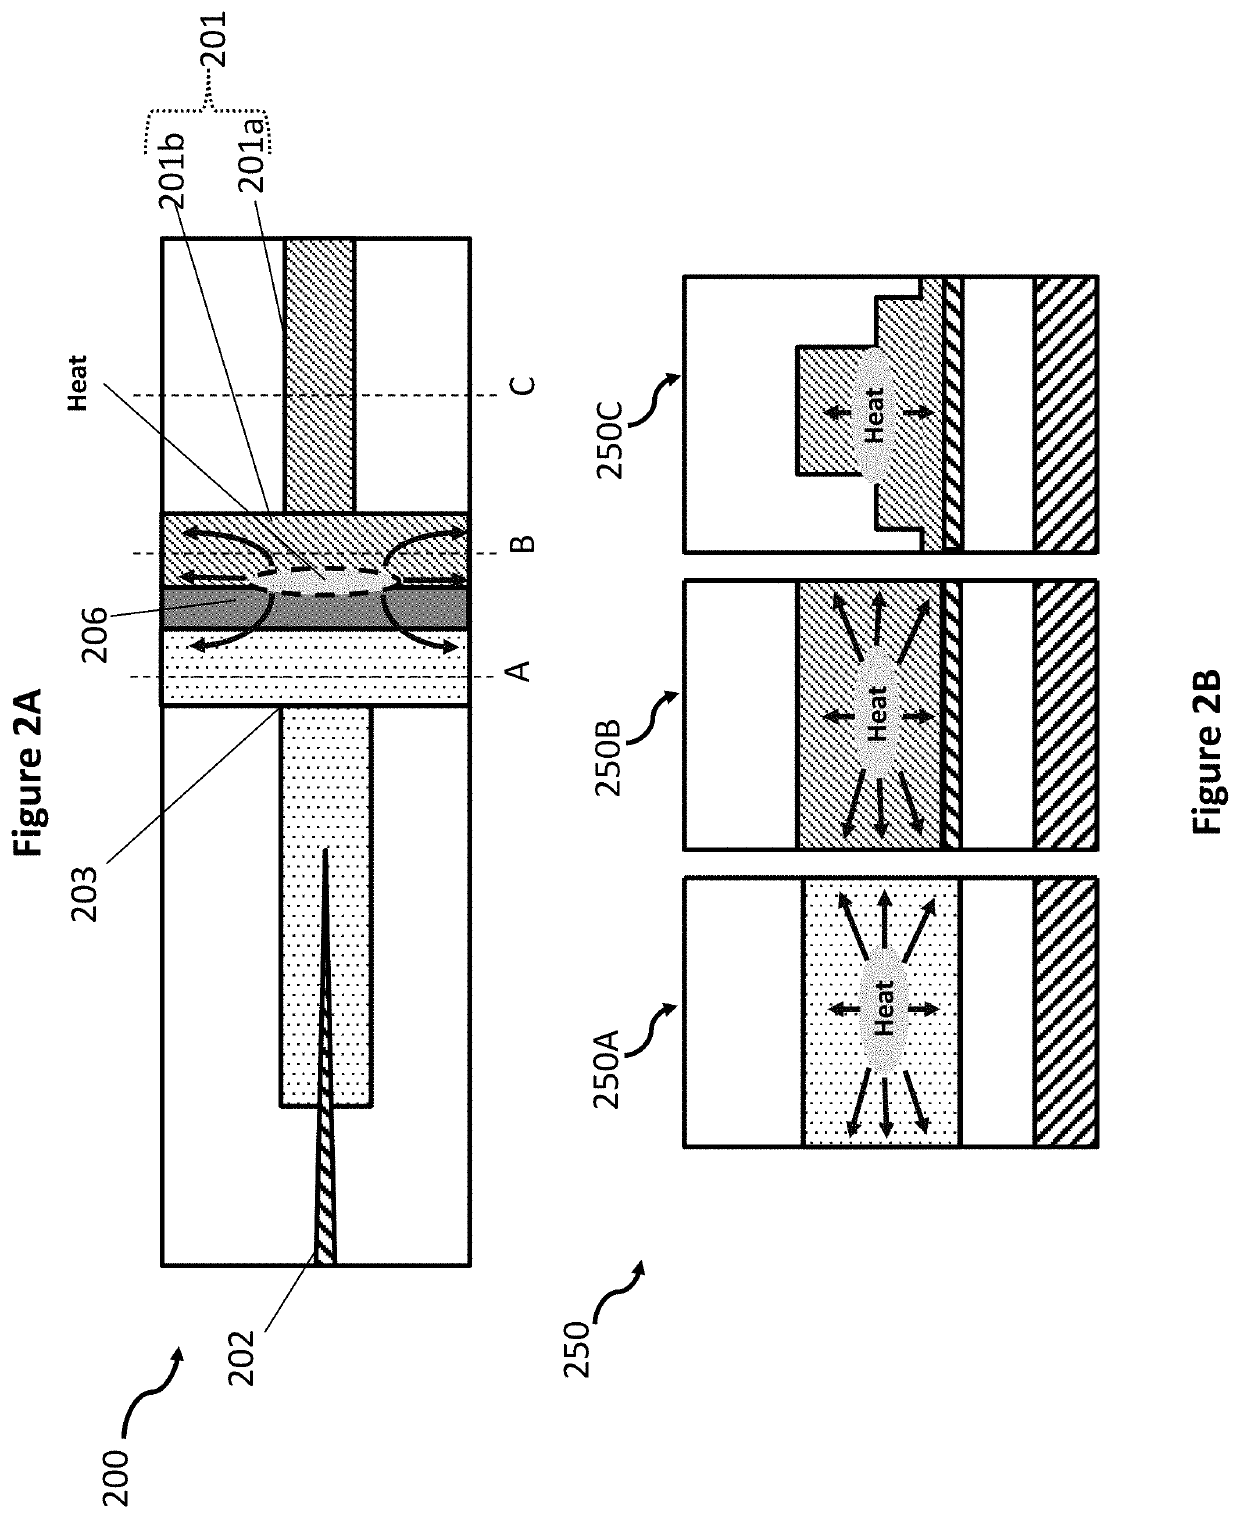 Integrated active devices with enhanced optical coupling to dielectric waveguides